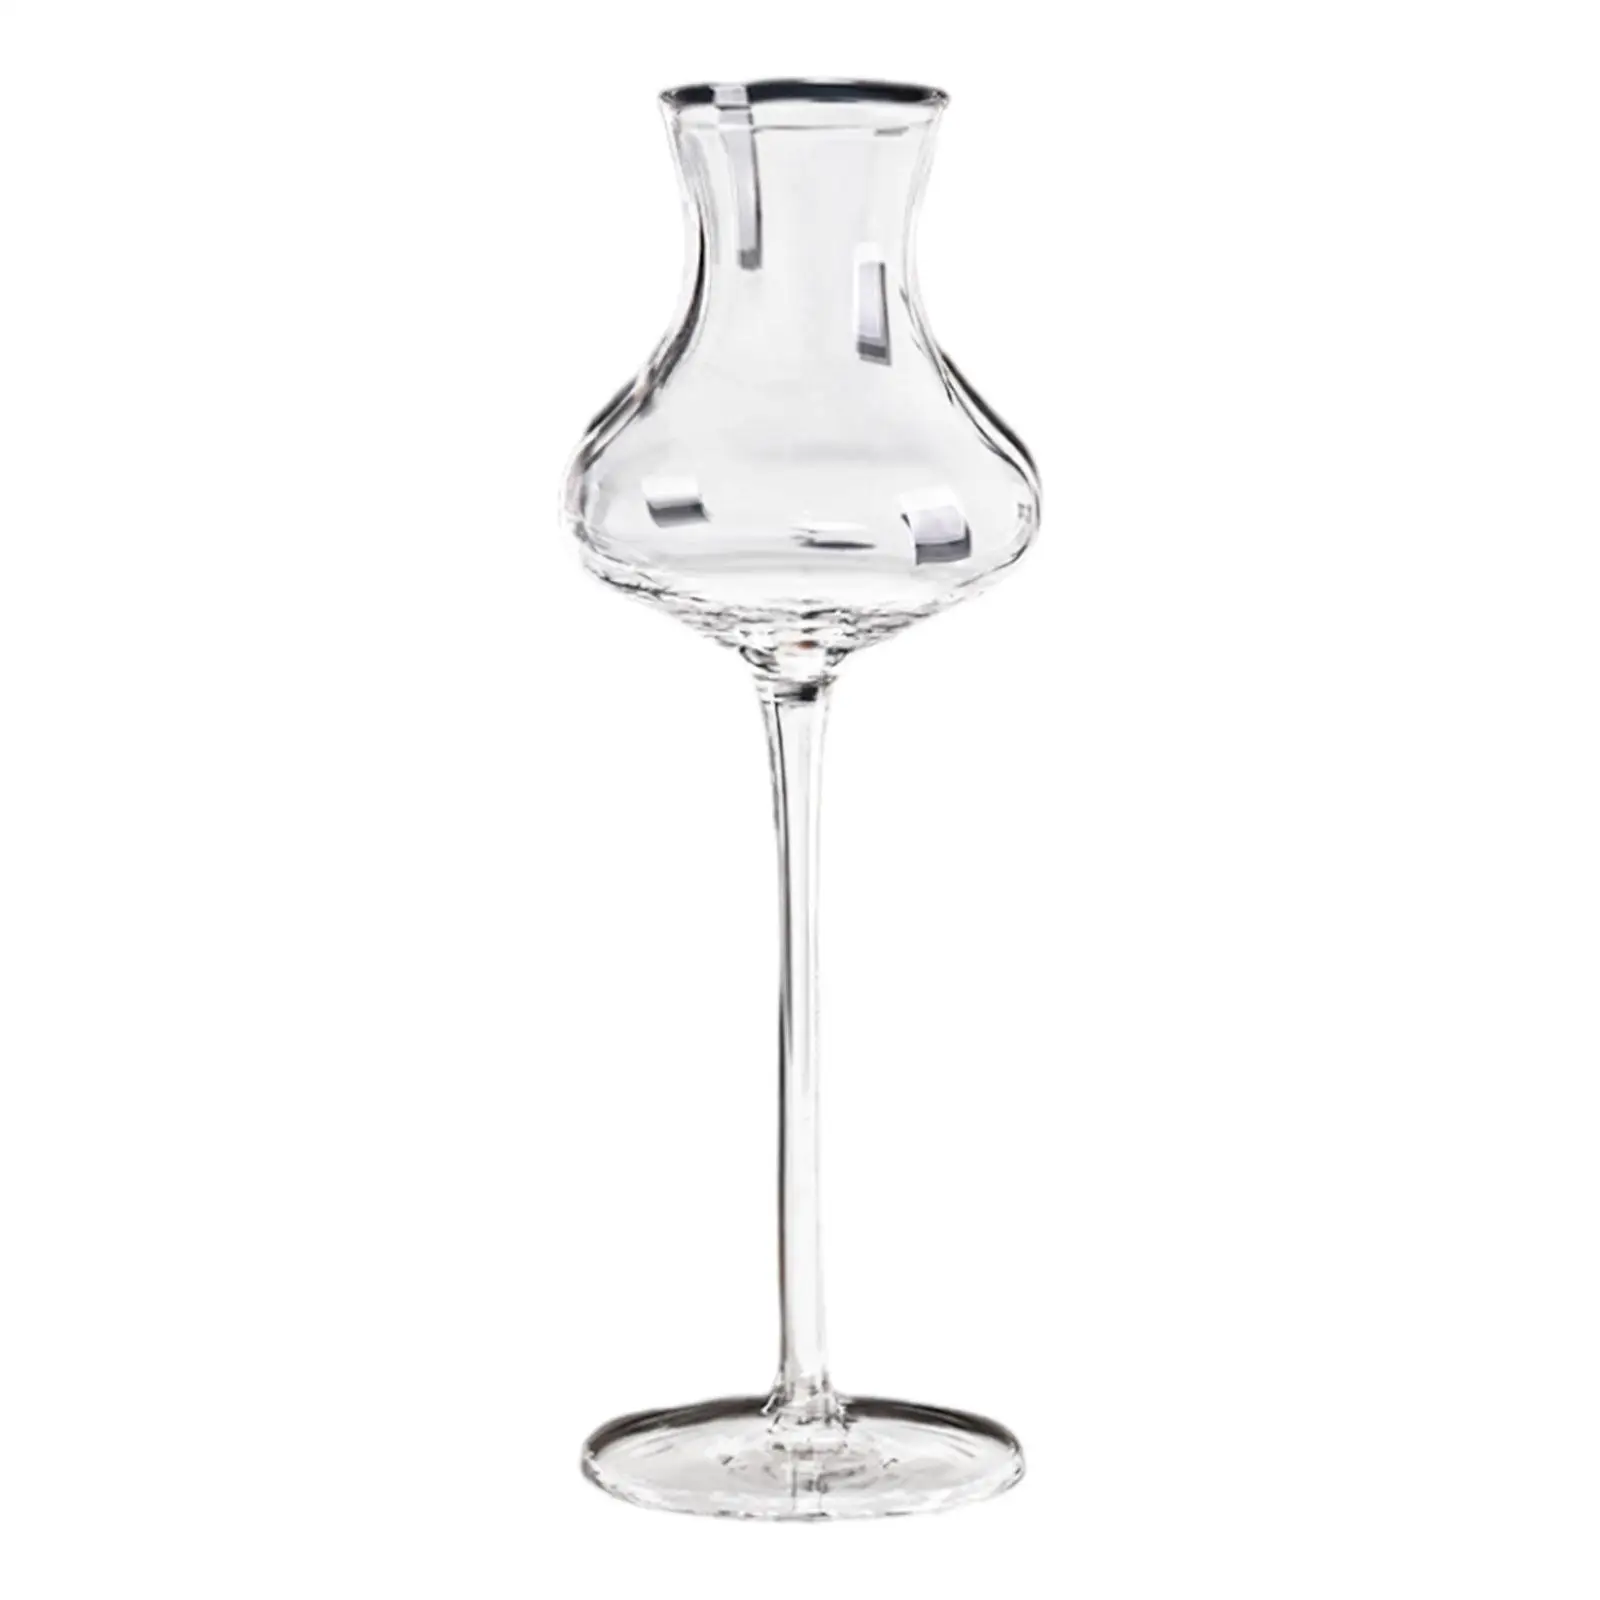 Glass Champagne Goblet Creative 130ml Wine Goblet Glasses for Gifts Anniversary Drinking KTV Bar Club Party Decoration